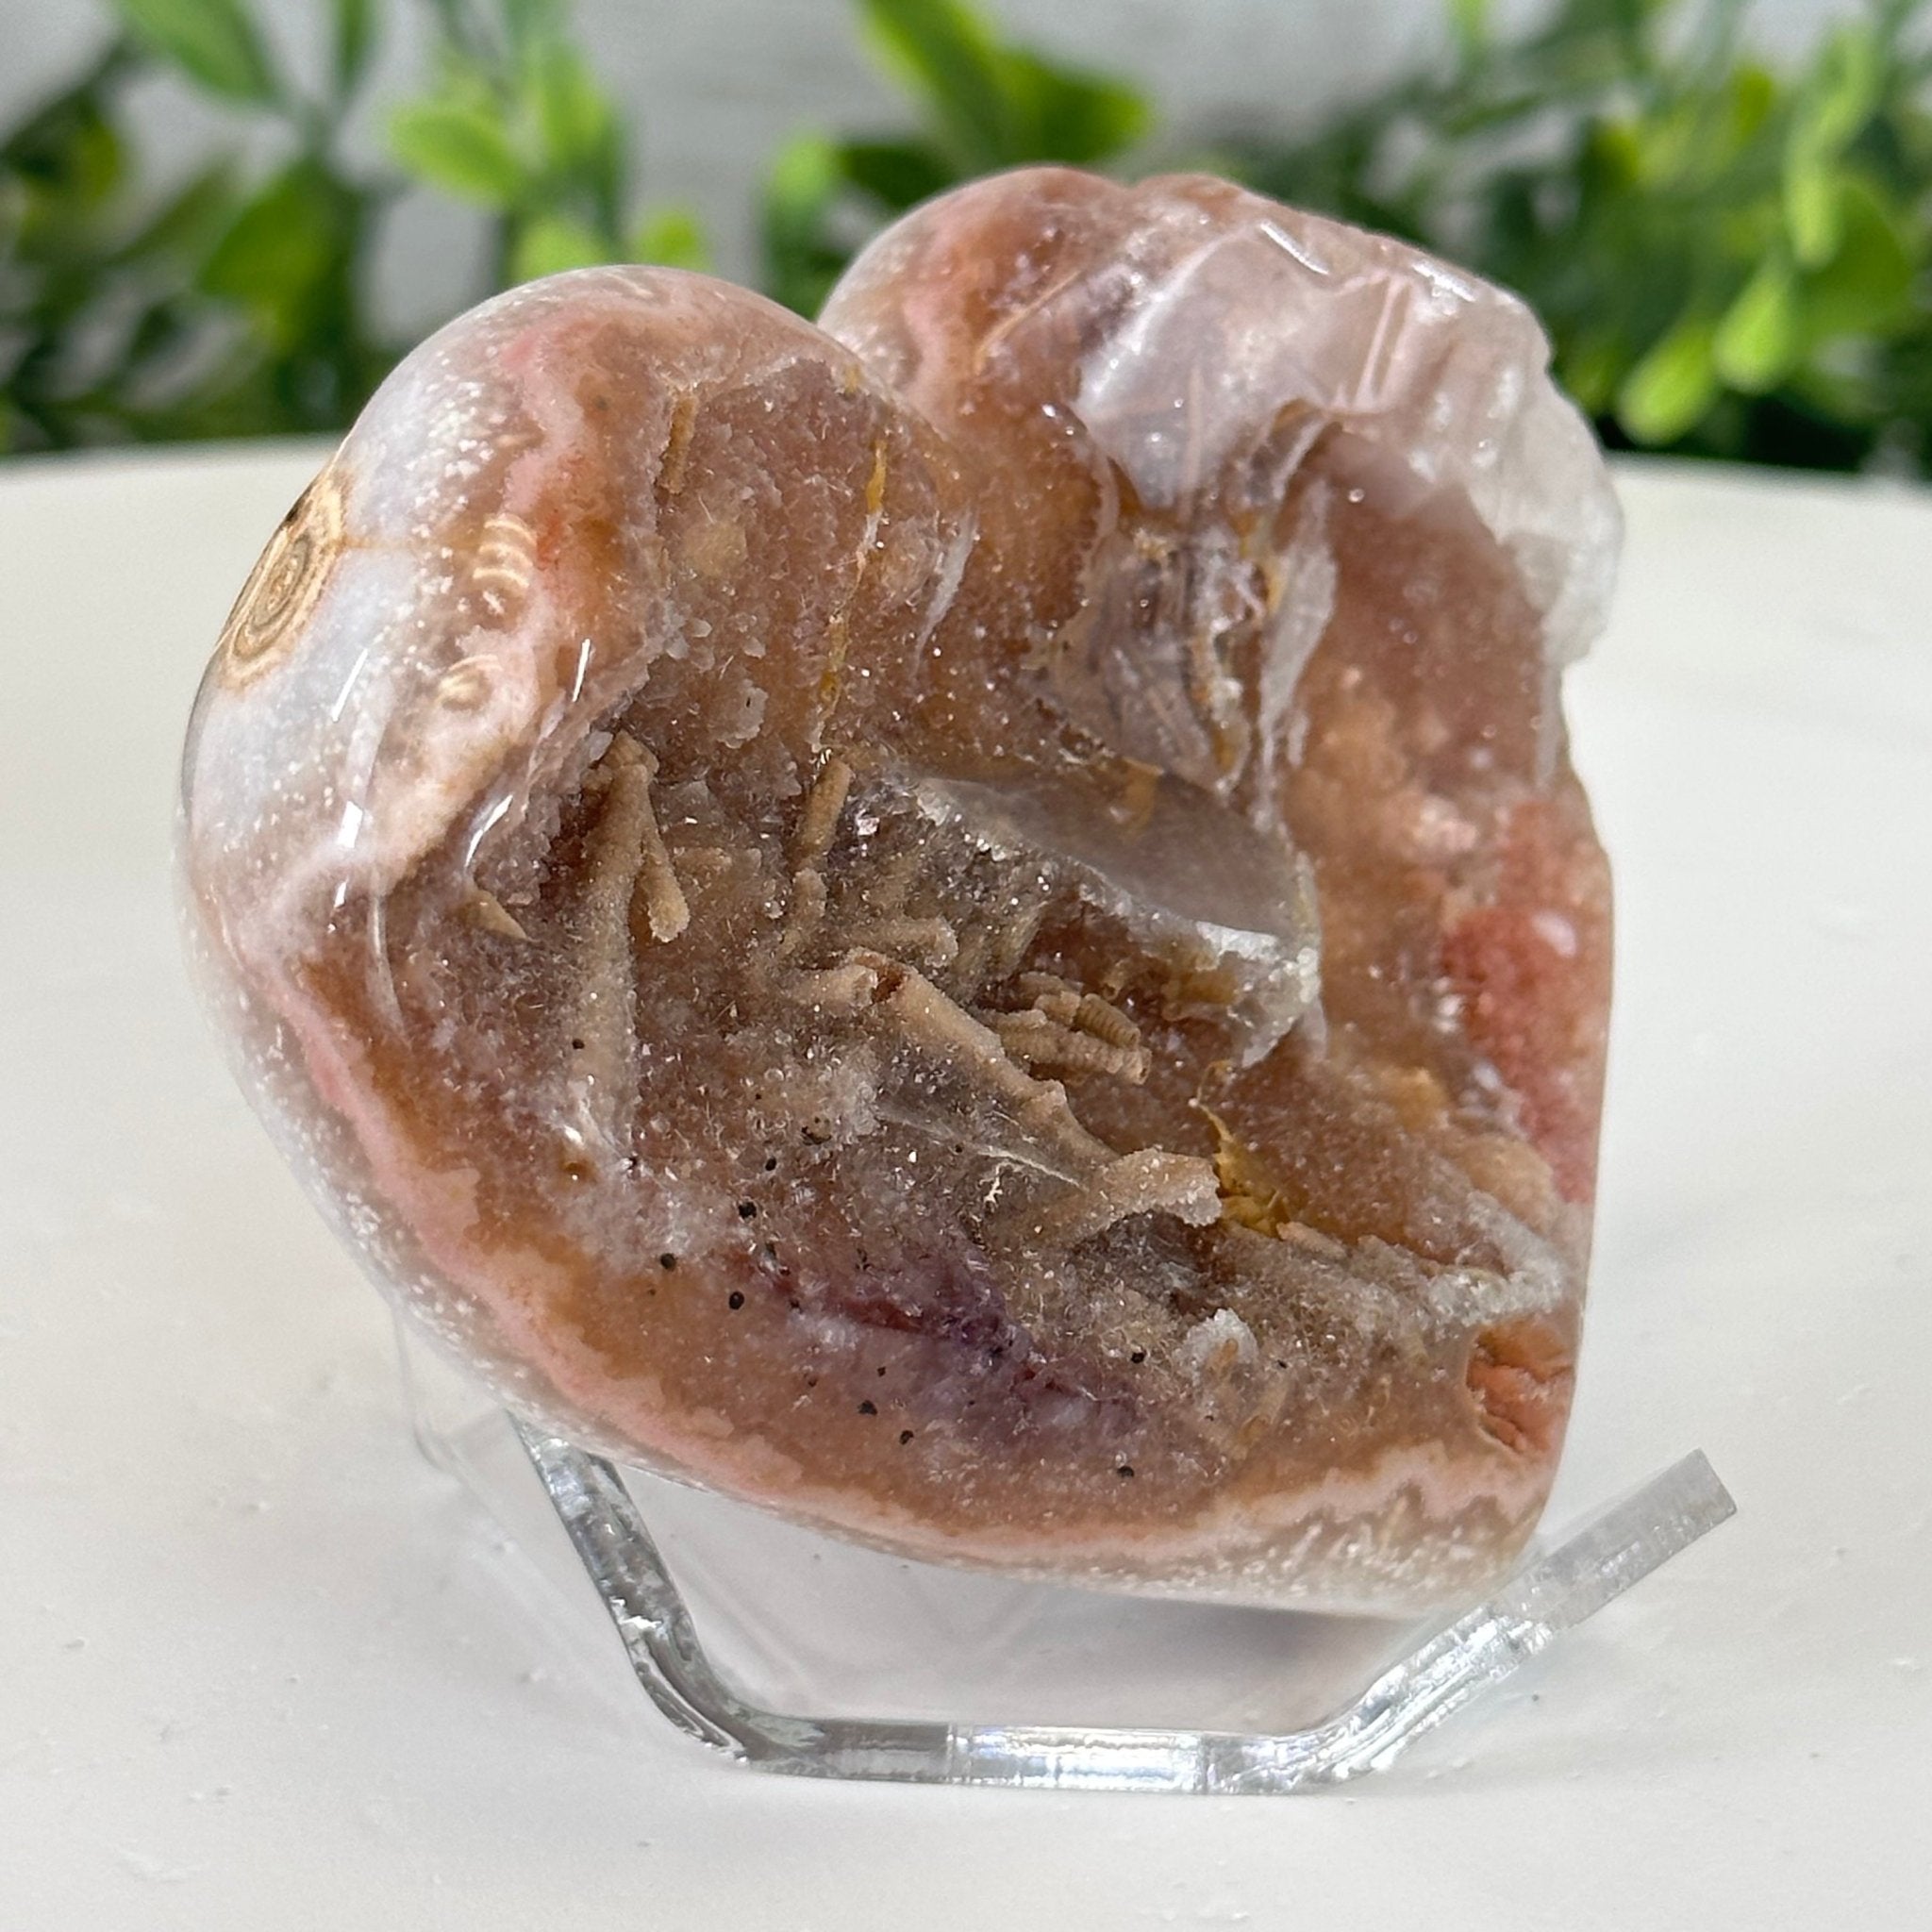 Extra Plus Quality Pink Amethyst Heart Geode on an Acrylic Stand, 0.37 lbs & 2.5" Tall #5462PK-001 by Brazil Gems - Brazil GemsBrazil GemsExtra Plus Quality Pink Amethyst Heart Geode on an Acrylic Stand, 0.37 lbs & 2.5" Tall #5462PK-001 by Brazil GemsHearts5462PK-001